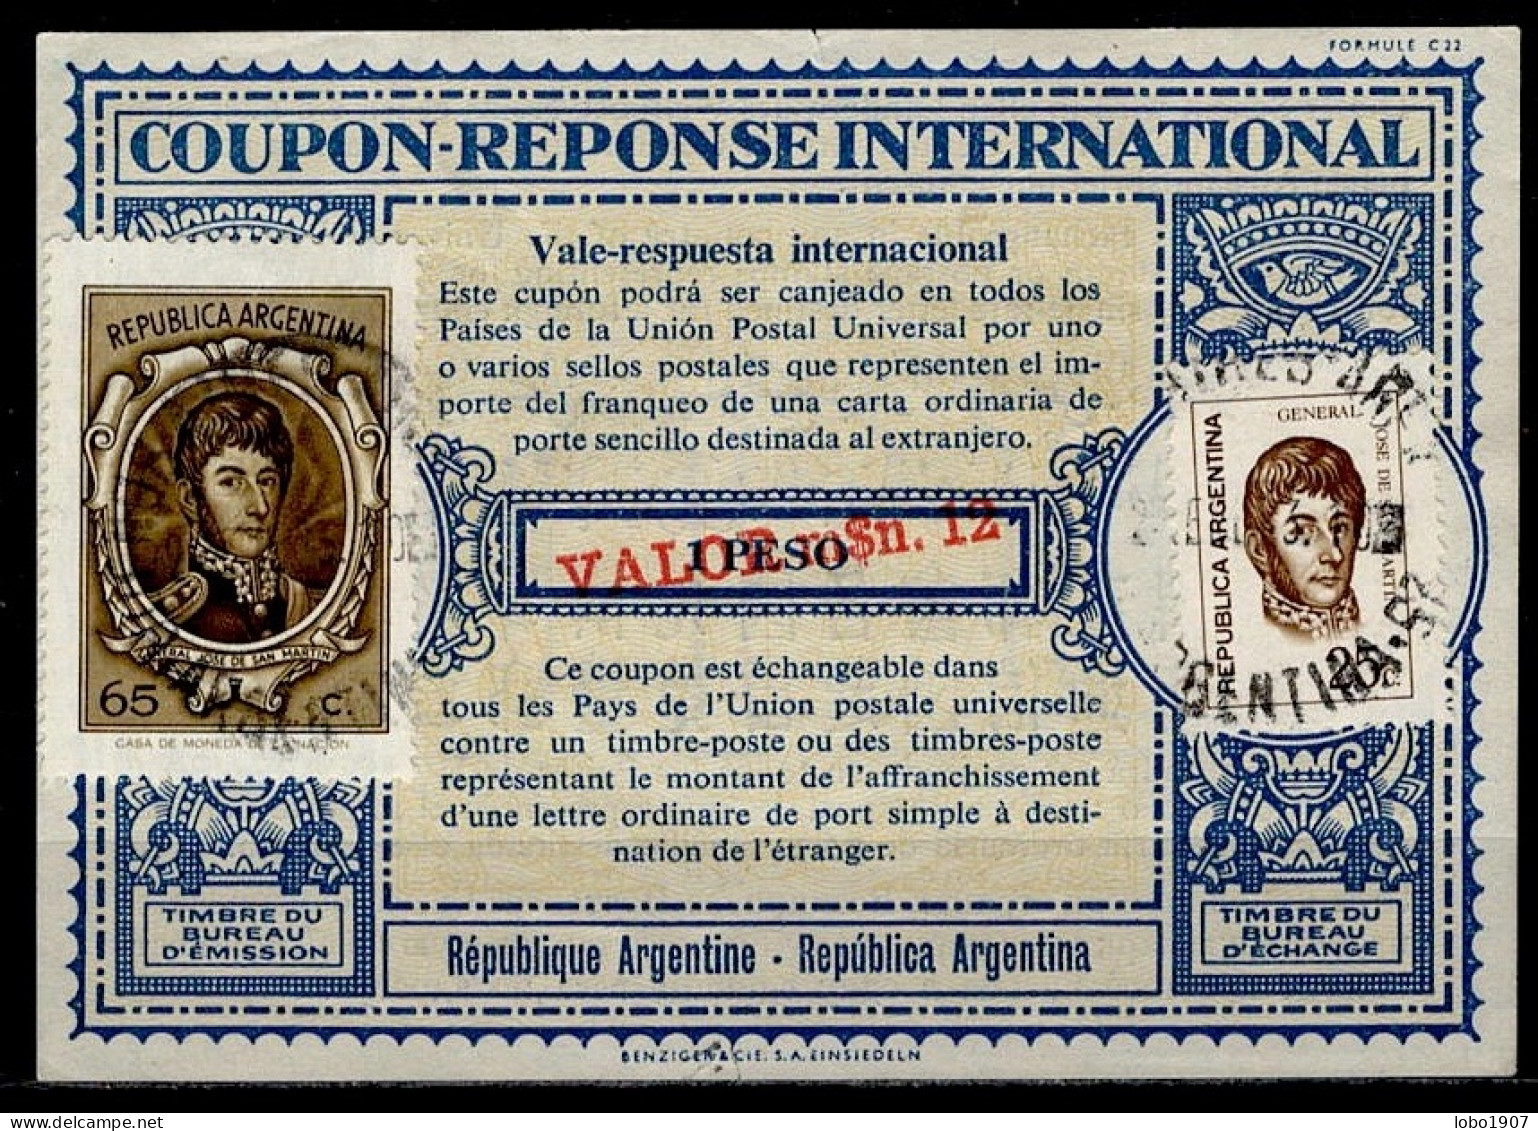 ARGENTINE ARGENTINA Lo16u  M$.12 / 1 PESO + Stamps 90 Pesos International Reply Coupon Reponse Antwortschein IRC IAS - Entiers Postaux